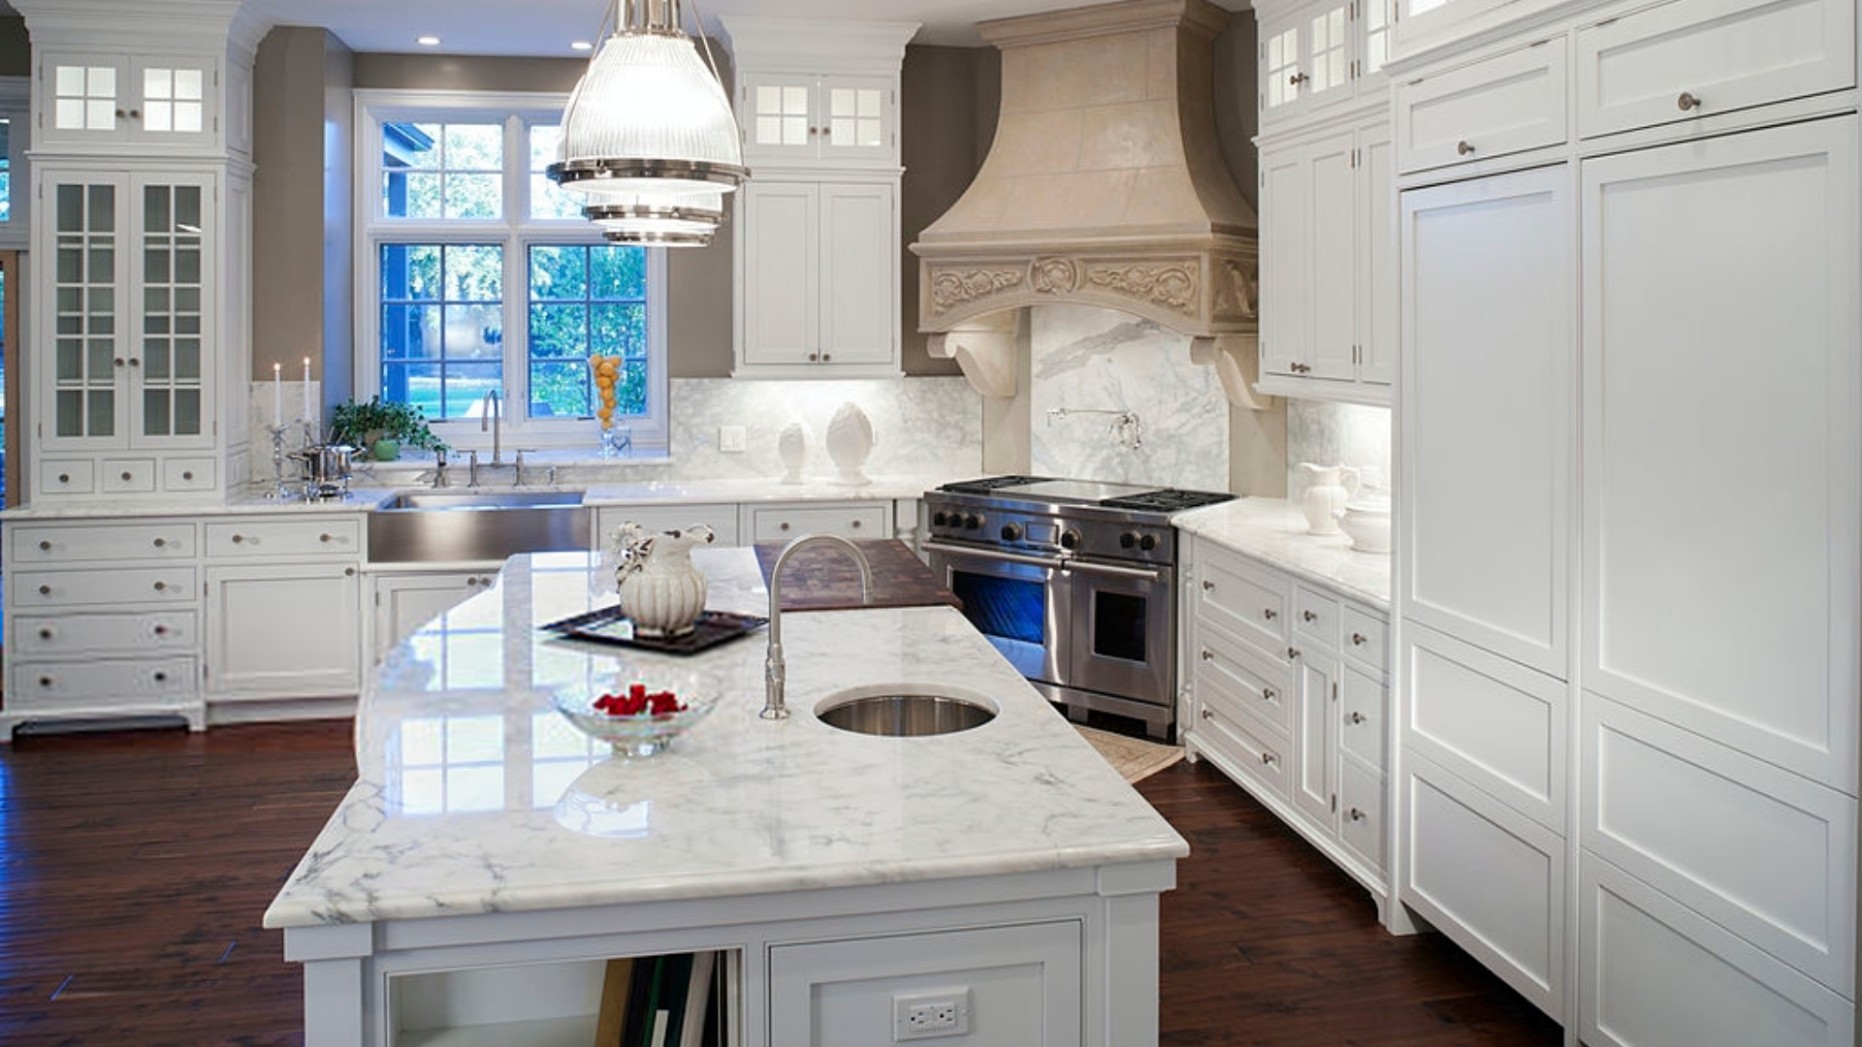 What Countertop Color Looks Best With White Cabinets in Your St  - what color granite looks best with white cabinets?